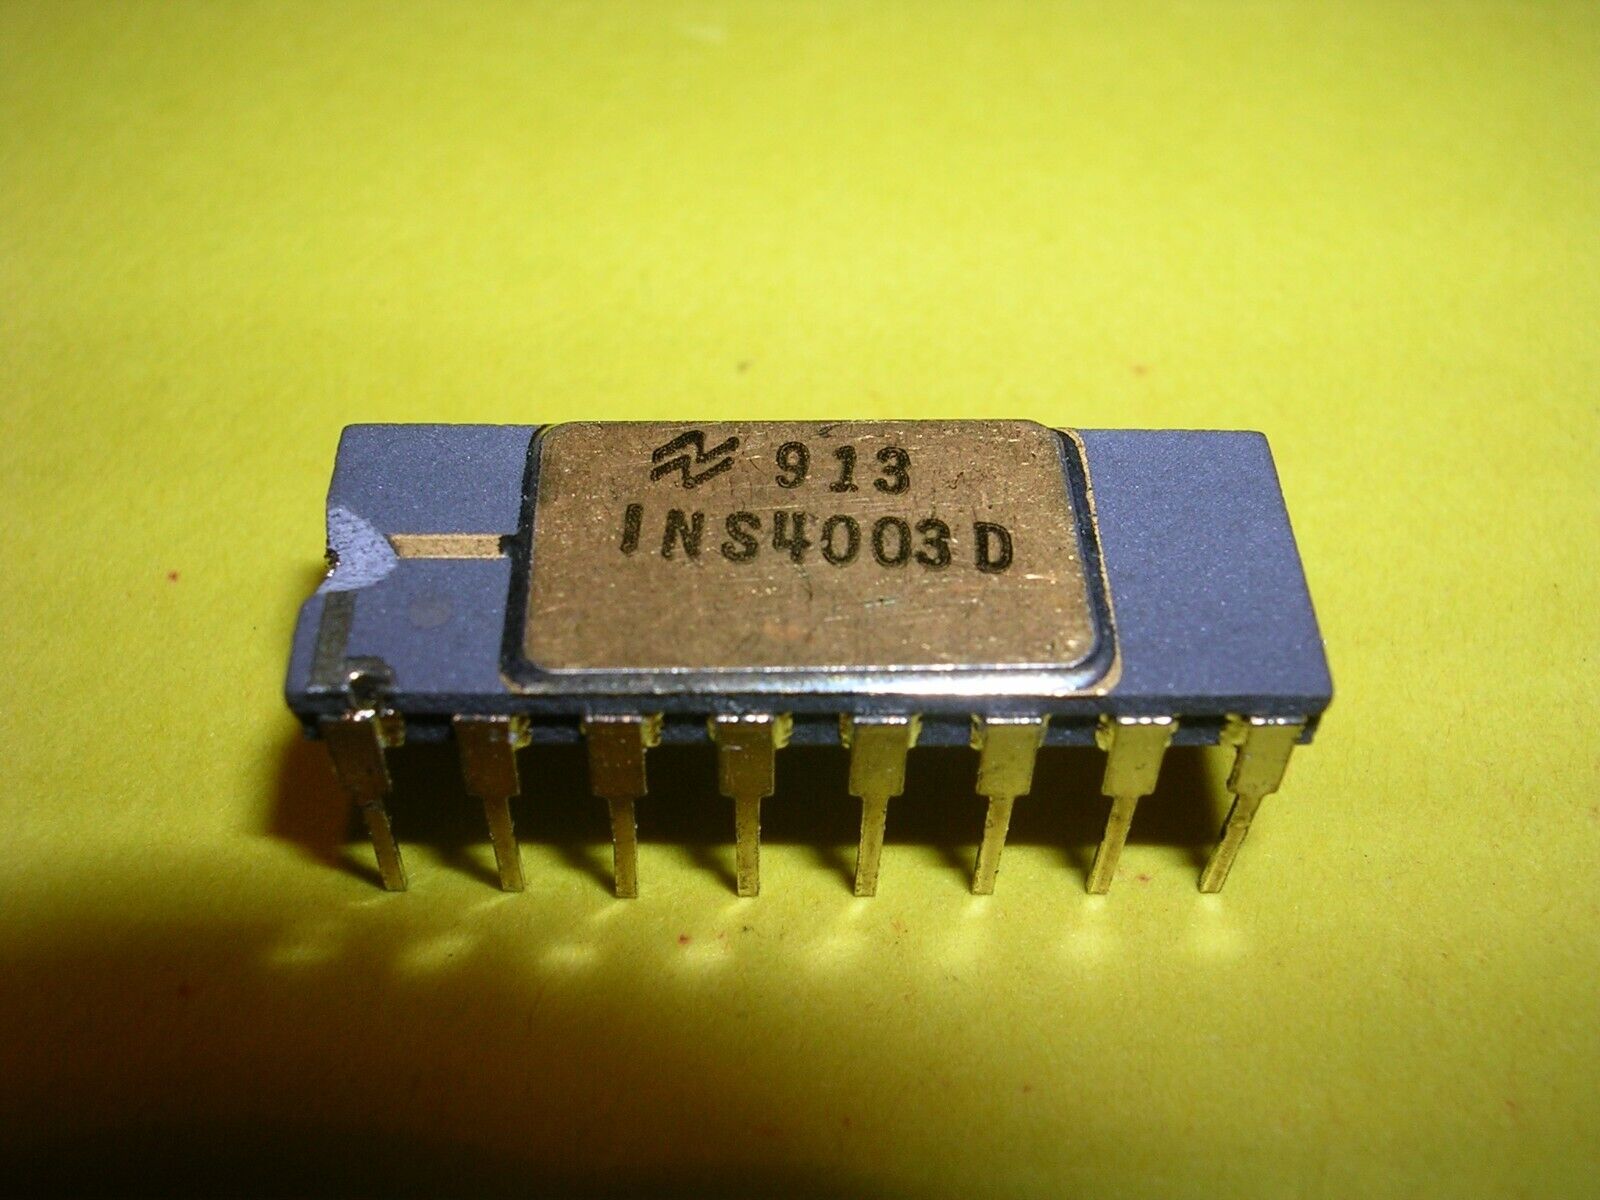 National Semiconductor INS4003D (INS4003) Chip for 4004 / C4004 / MCS-4, Type 2